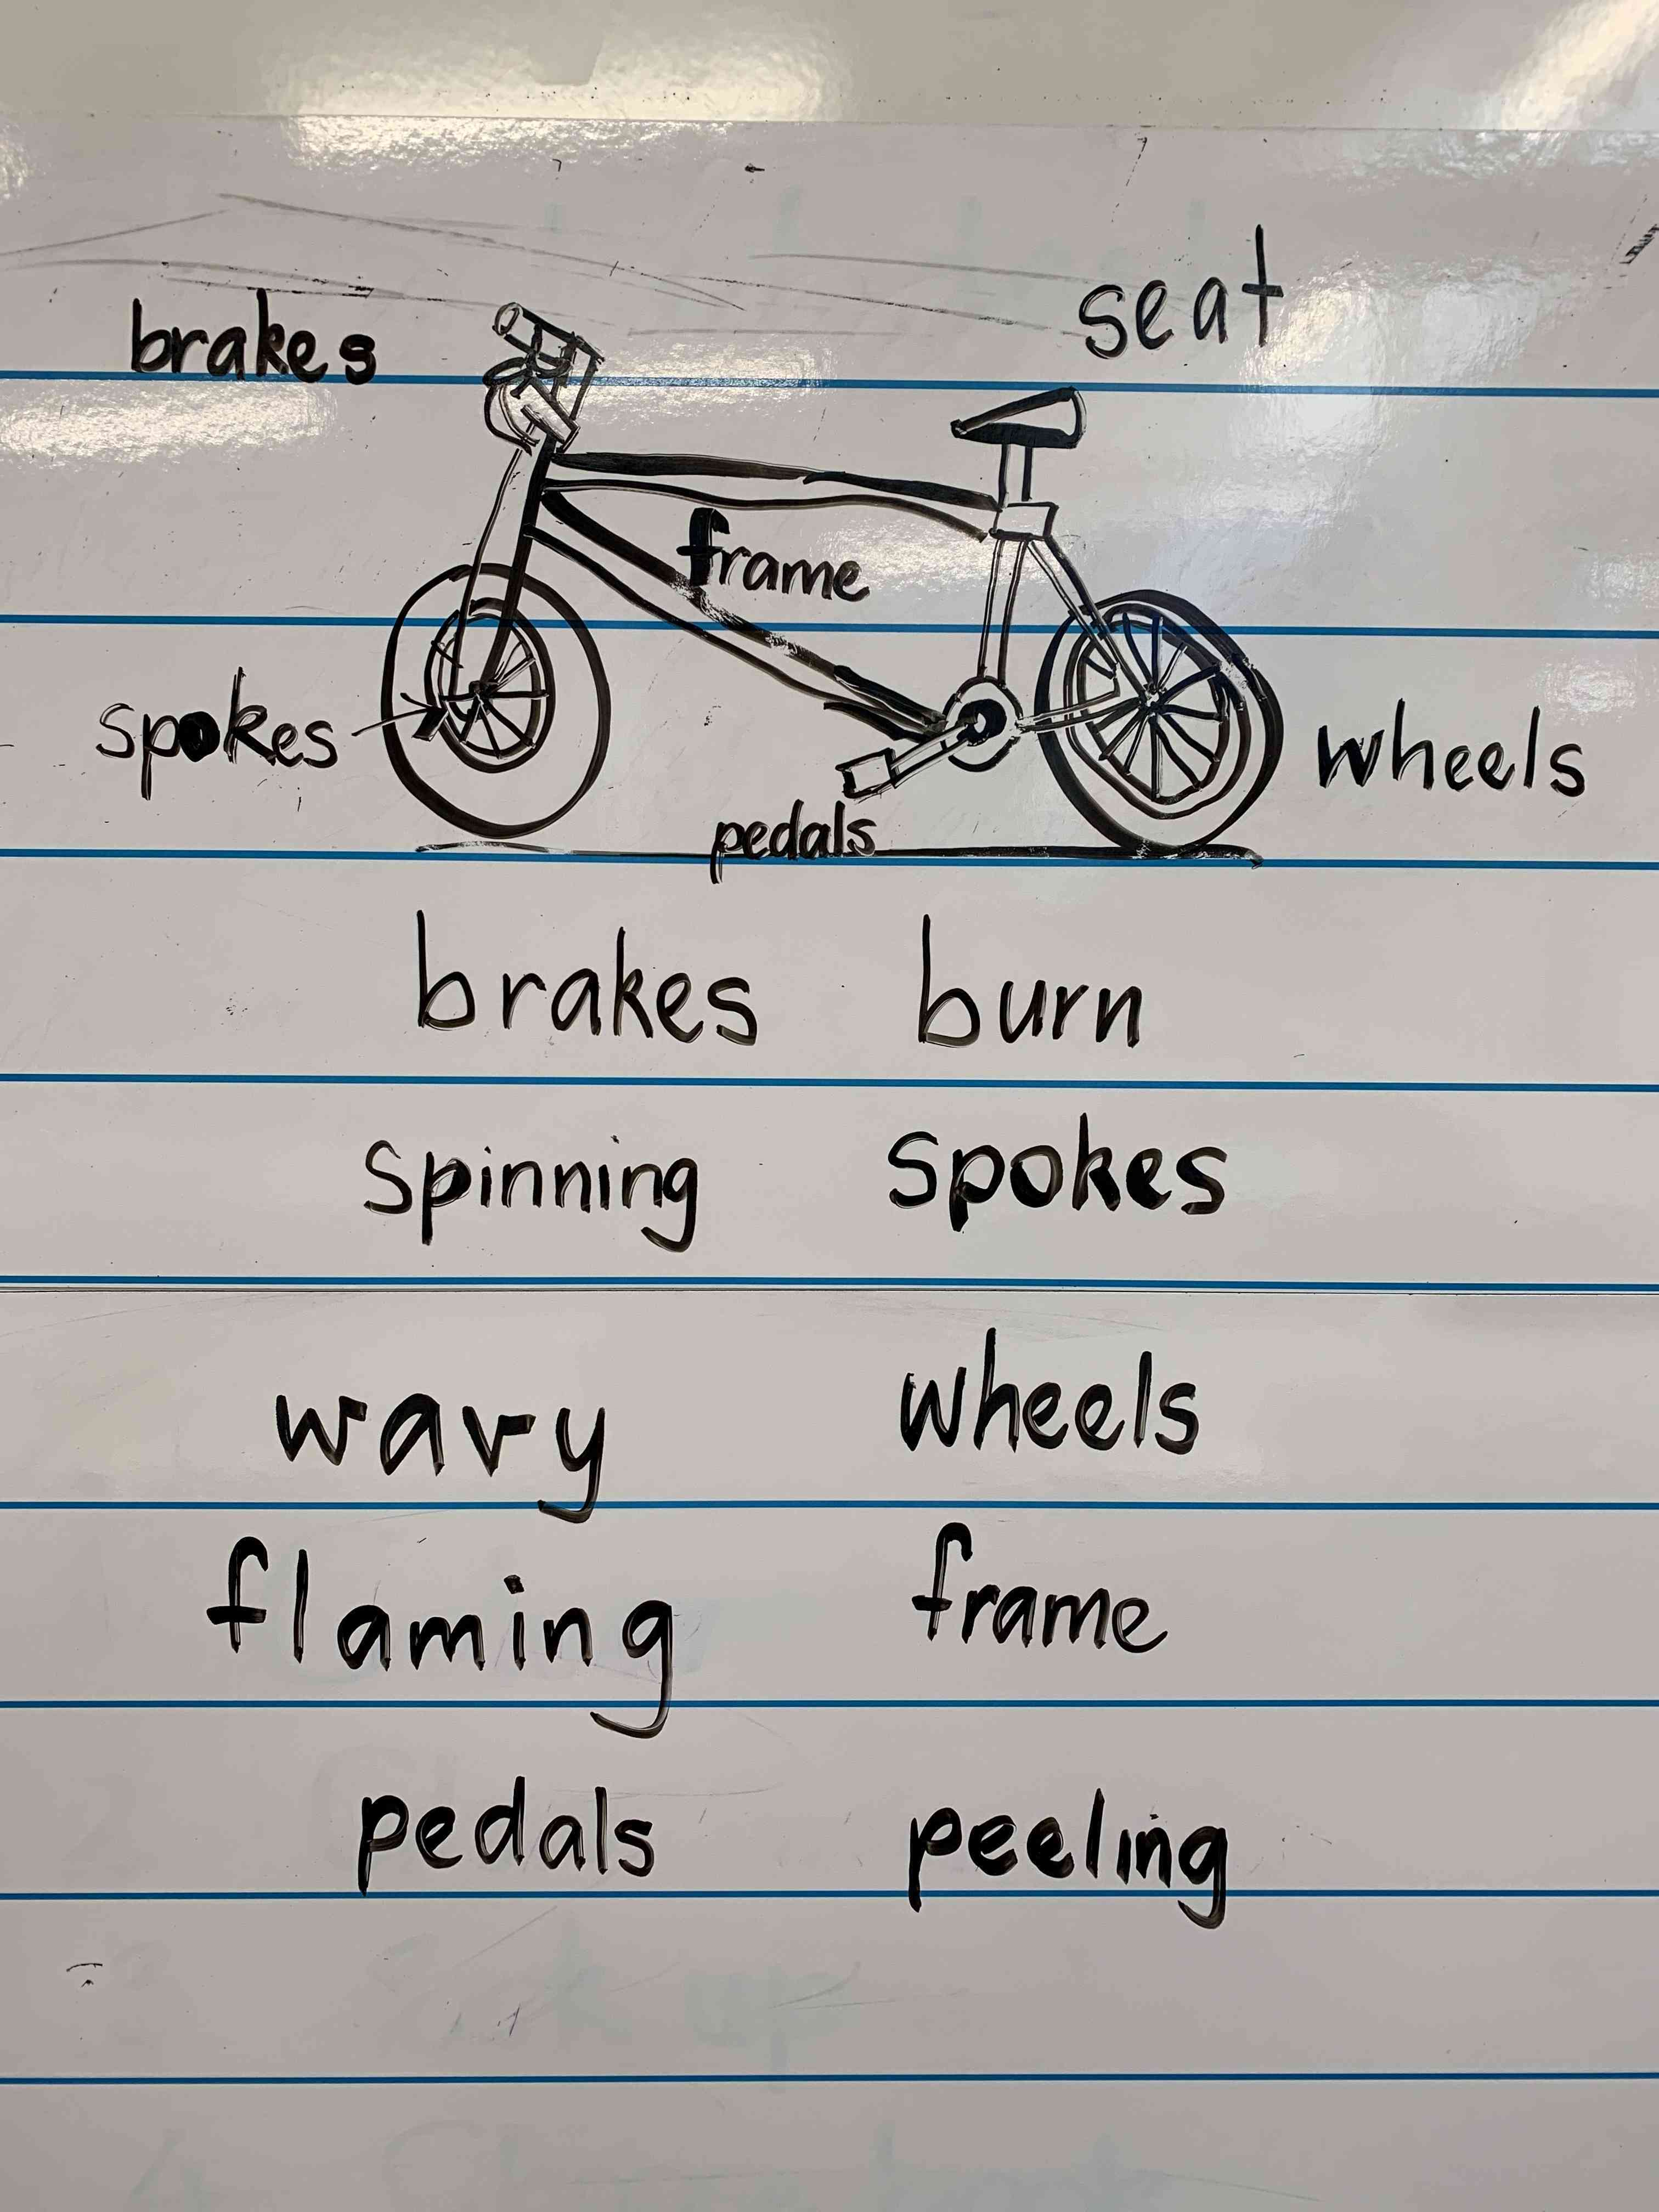 Class created bicycle poem